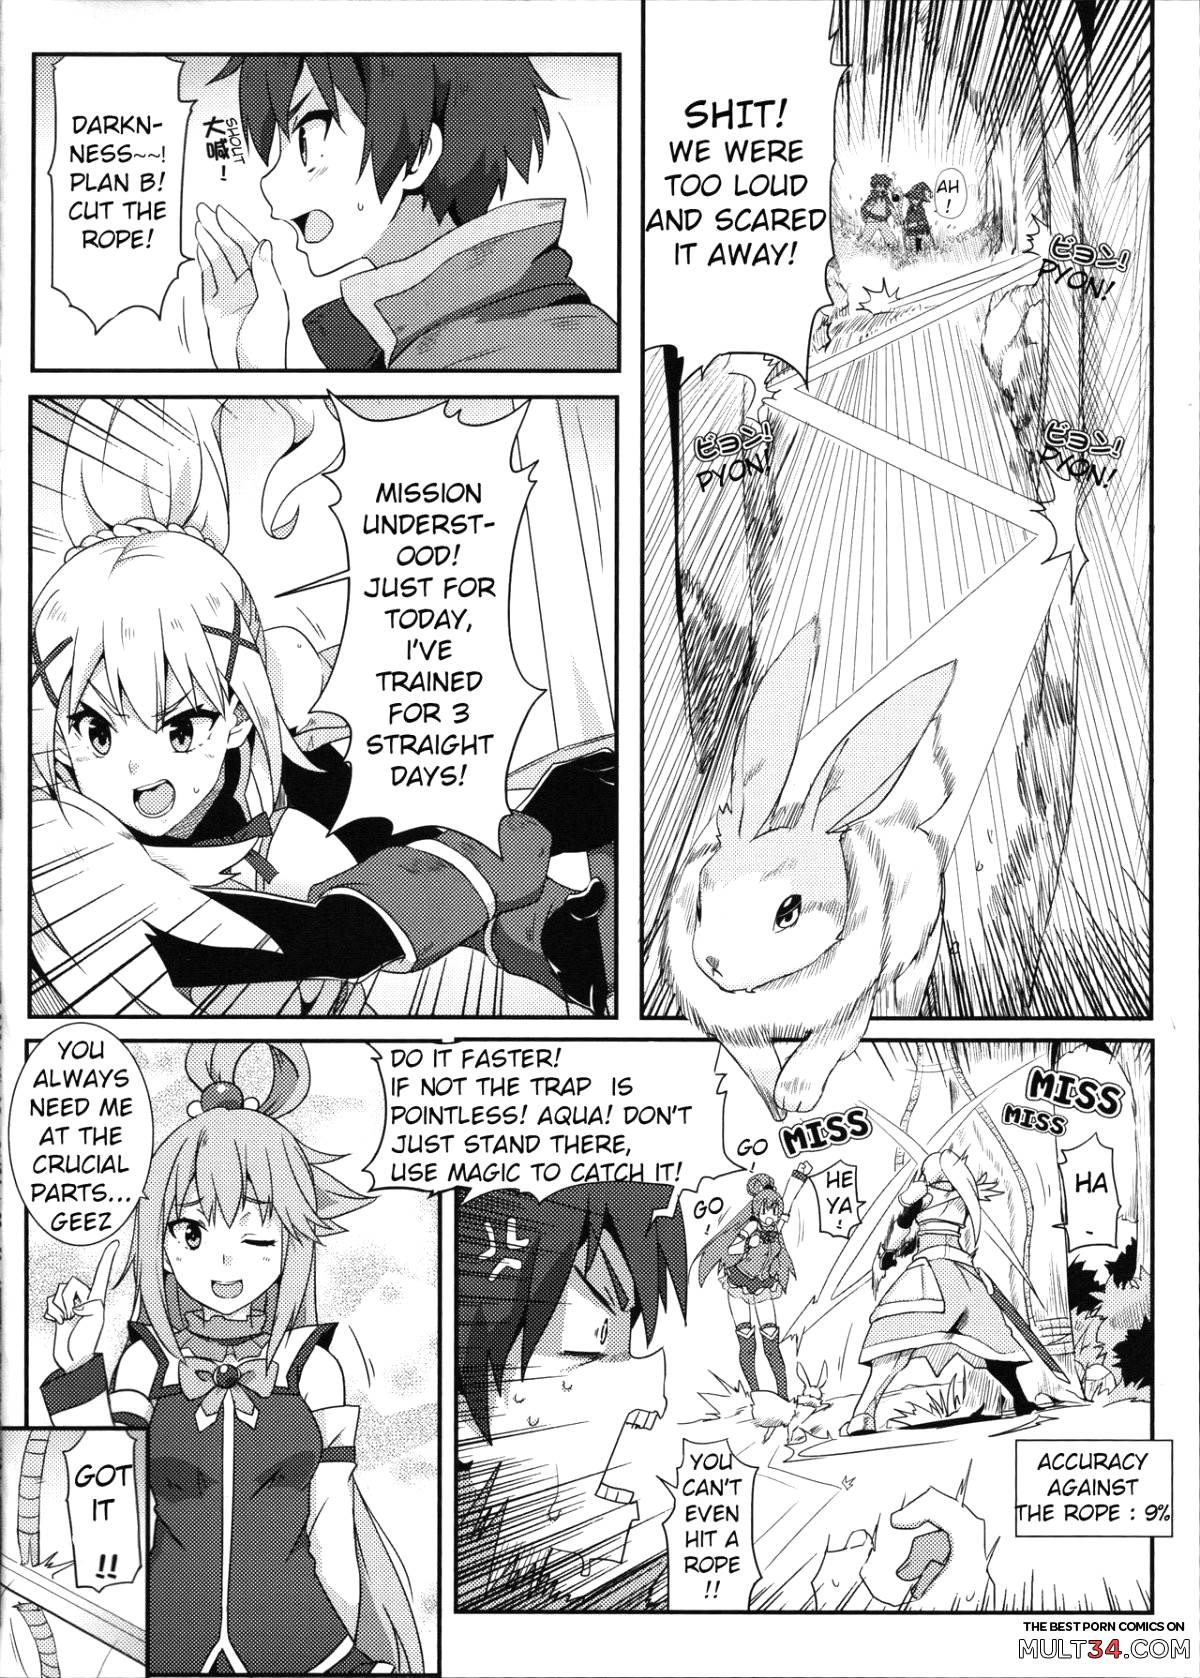 Blessing Megumin with a Magnificence Explosion! page 4